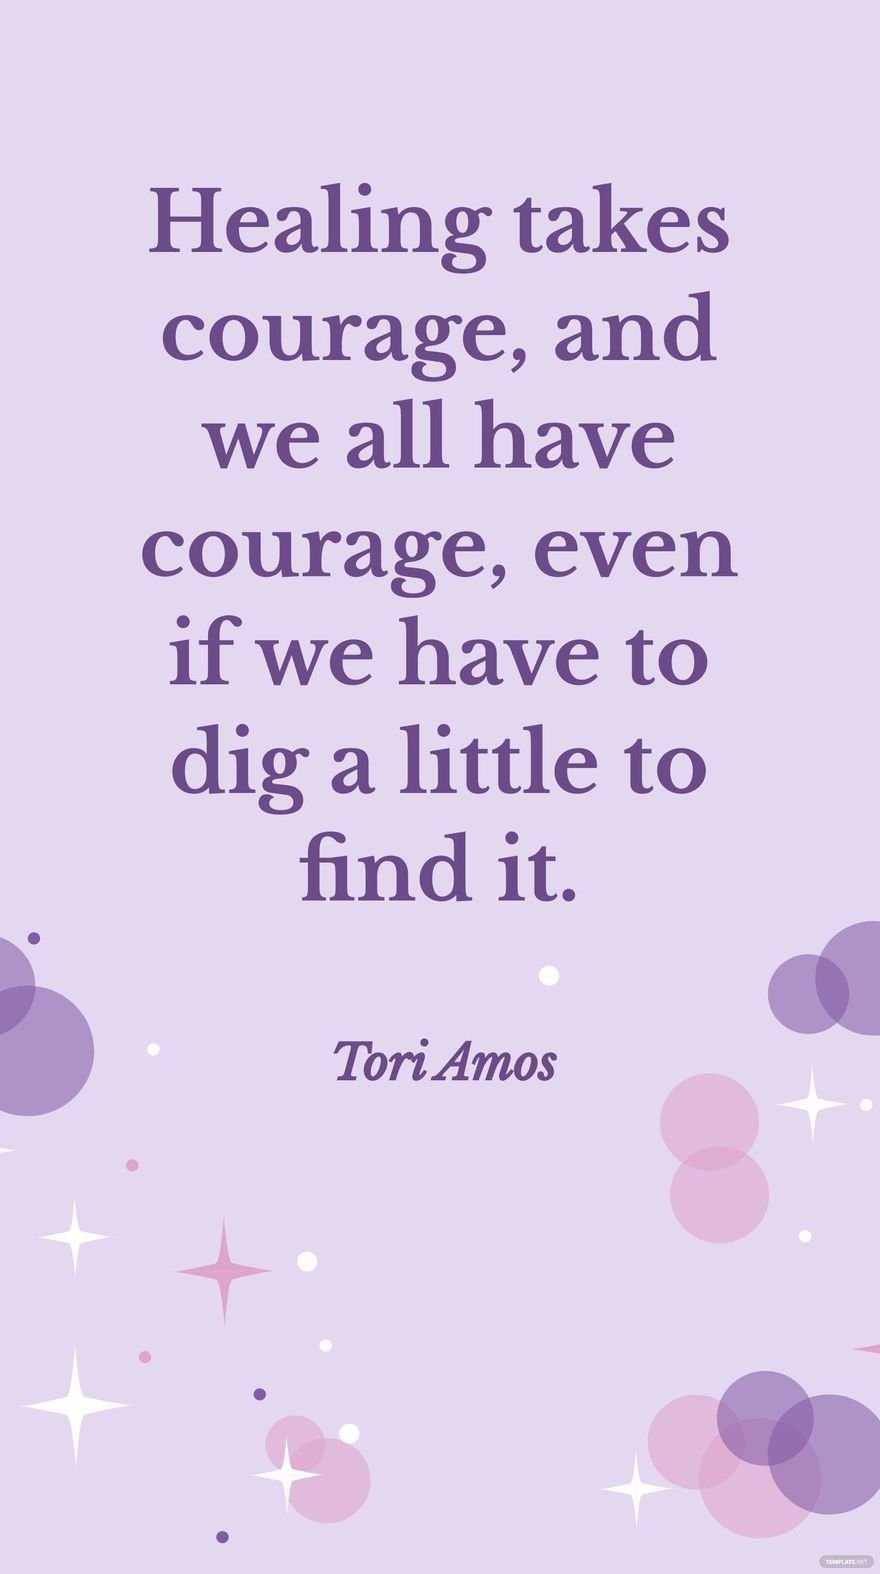 Tori Amos - Healing takes courage, and we all have courage, even if we have to dig a little to find it.